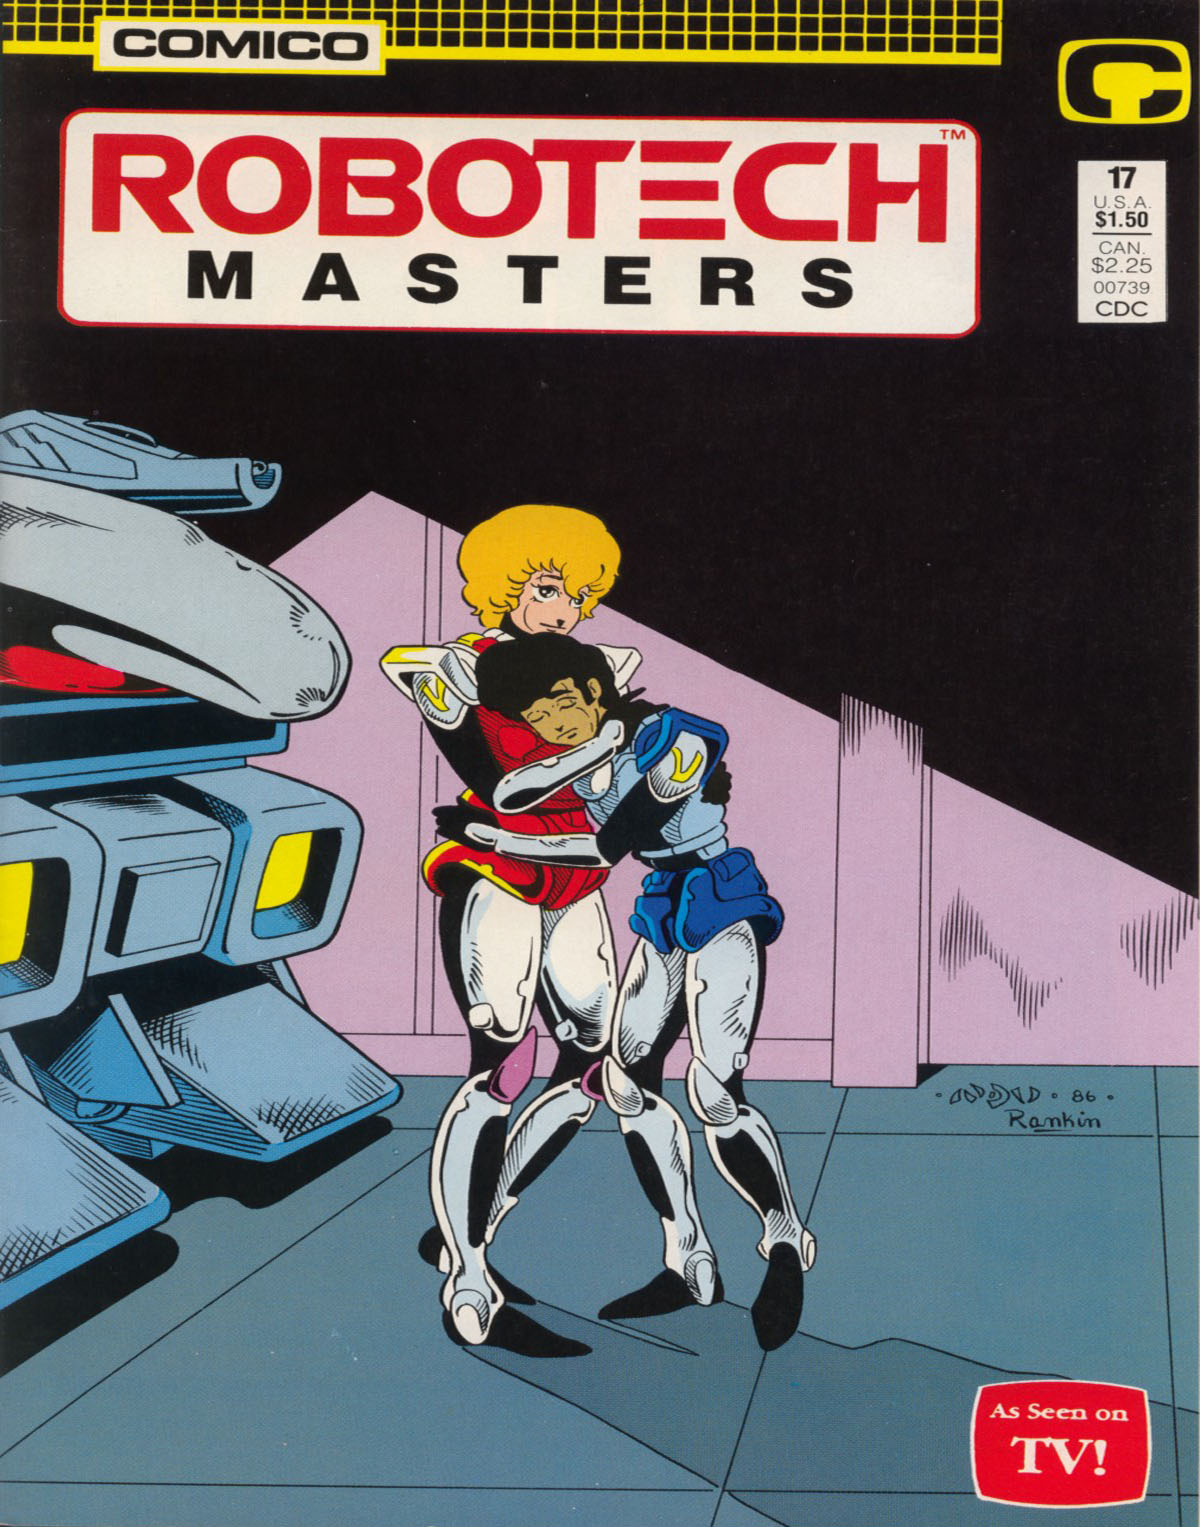 Read online Robotech Masters comic -  Issue #17 - 1